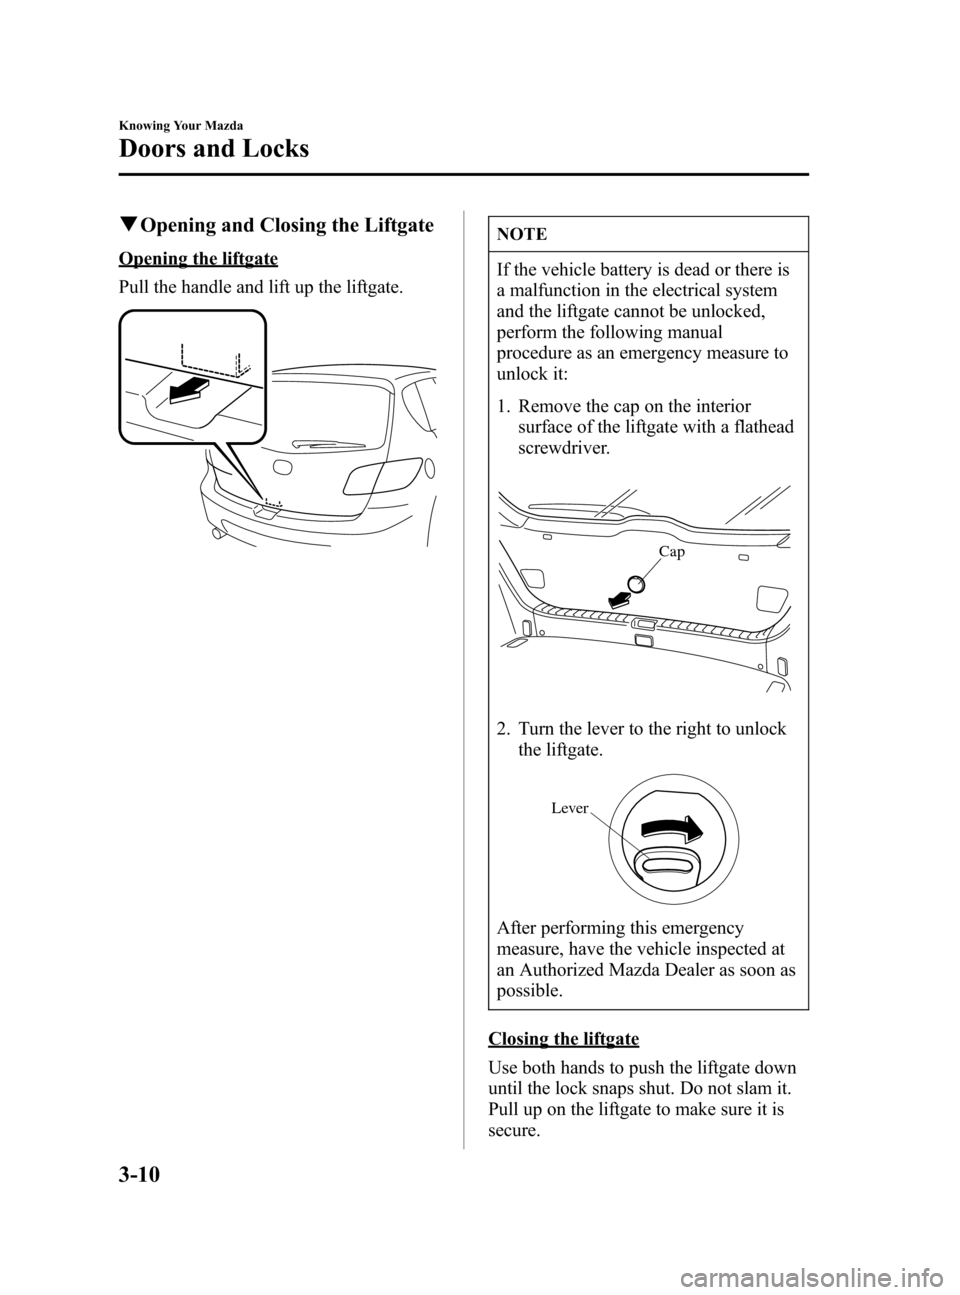 MAZDA MODEL 3 HATCHBACK 2005  Owners Manual (in English) Black plate (78,1)
qOpening and Closing the Liftgate
Opening the liftgate
Pull the handle and lift up the liftgate.
NOTE
If the vehicle battery is dead or there is
a malfunction in the electrical syst